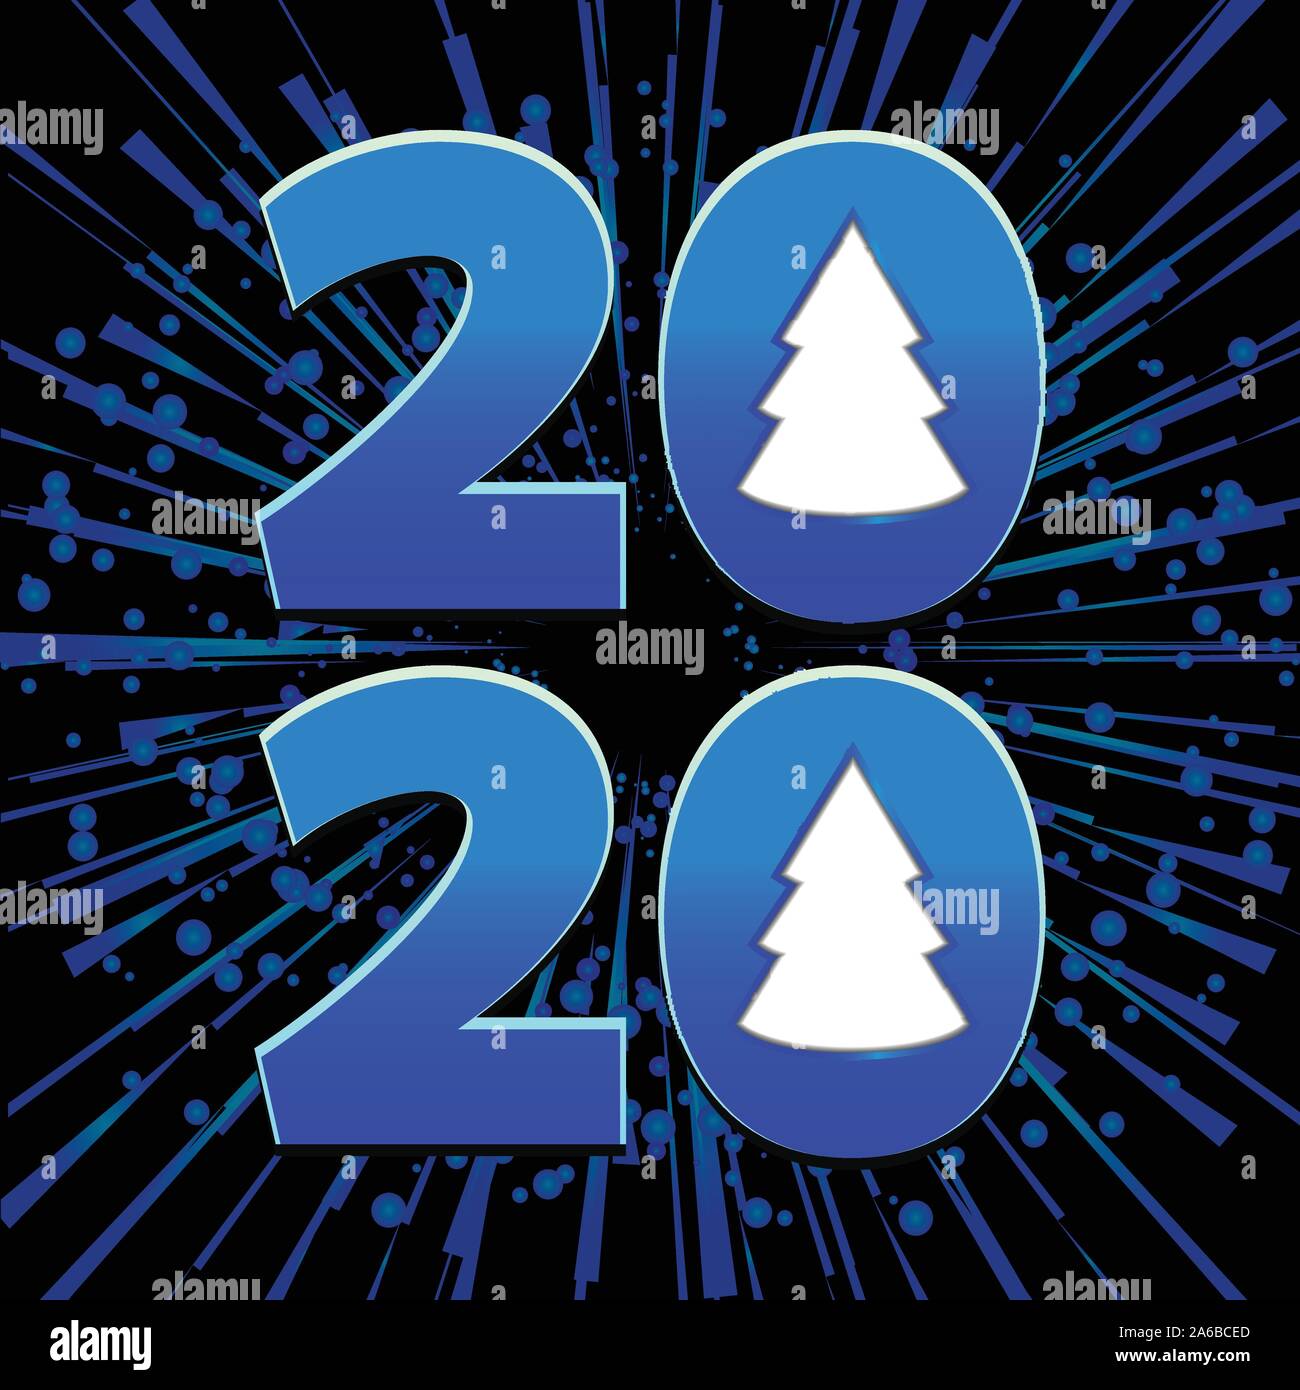 2020 Decorative Date With Christmas Trees Over Black Background With Starburst Stock Vector